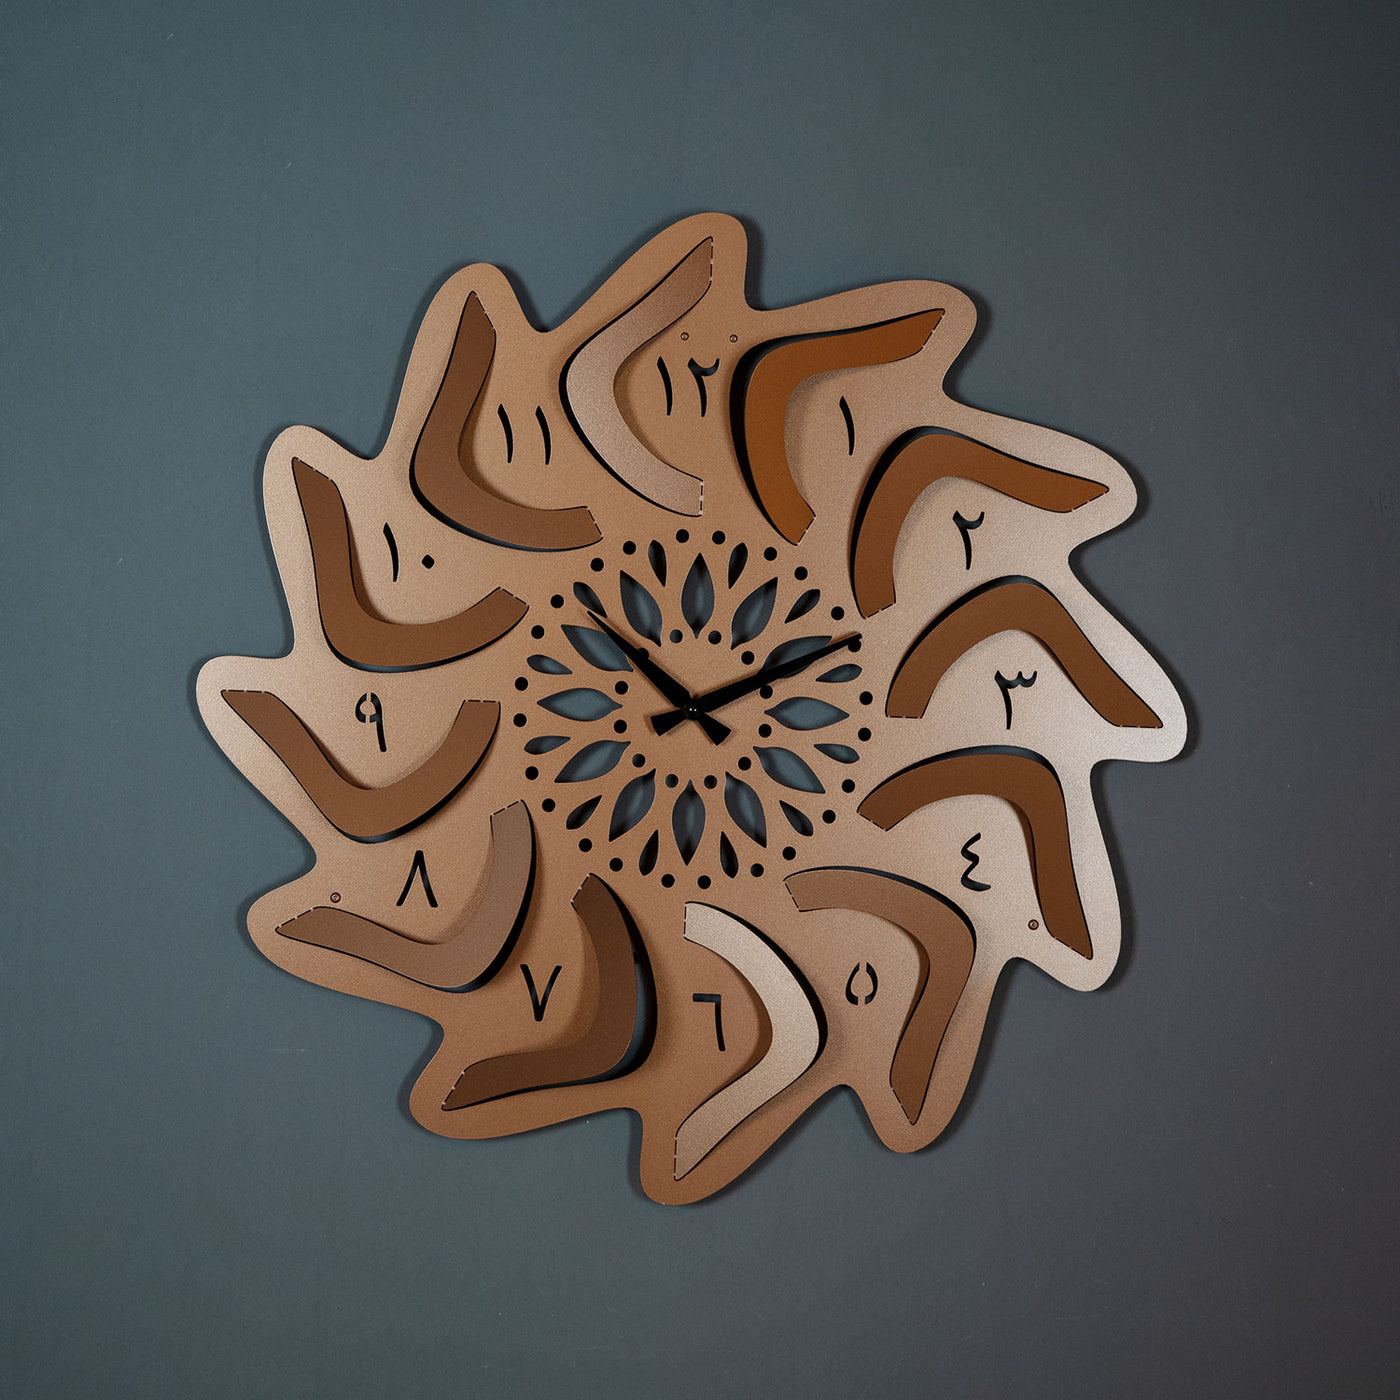 3D Metal Wall Clock with Arabic Numbers - WAMS010